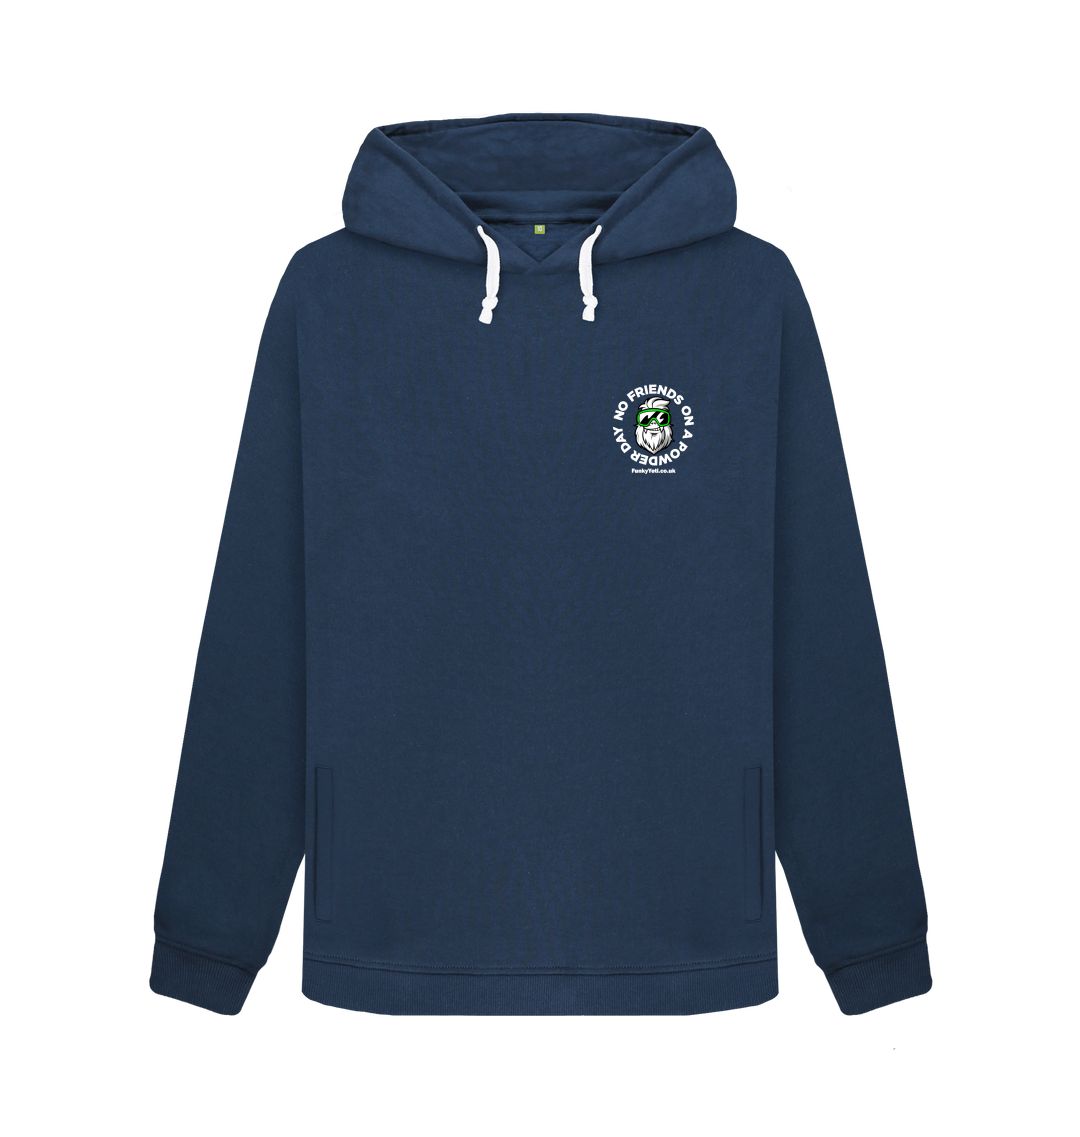 Navy Blue Funky Yeti Women's Pullover Hoodie - No Friends On A Powder Day